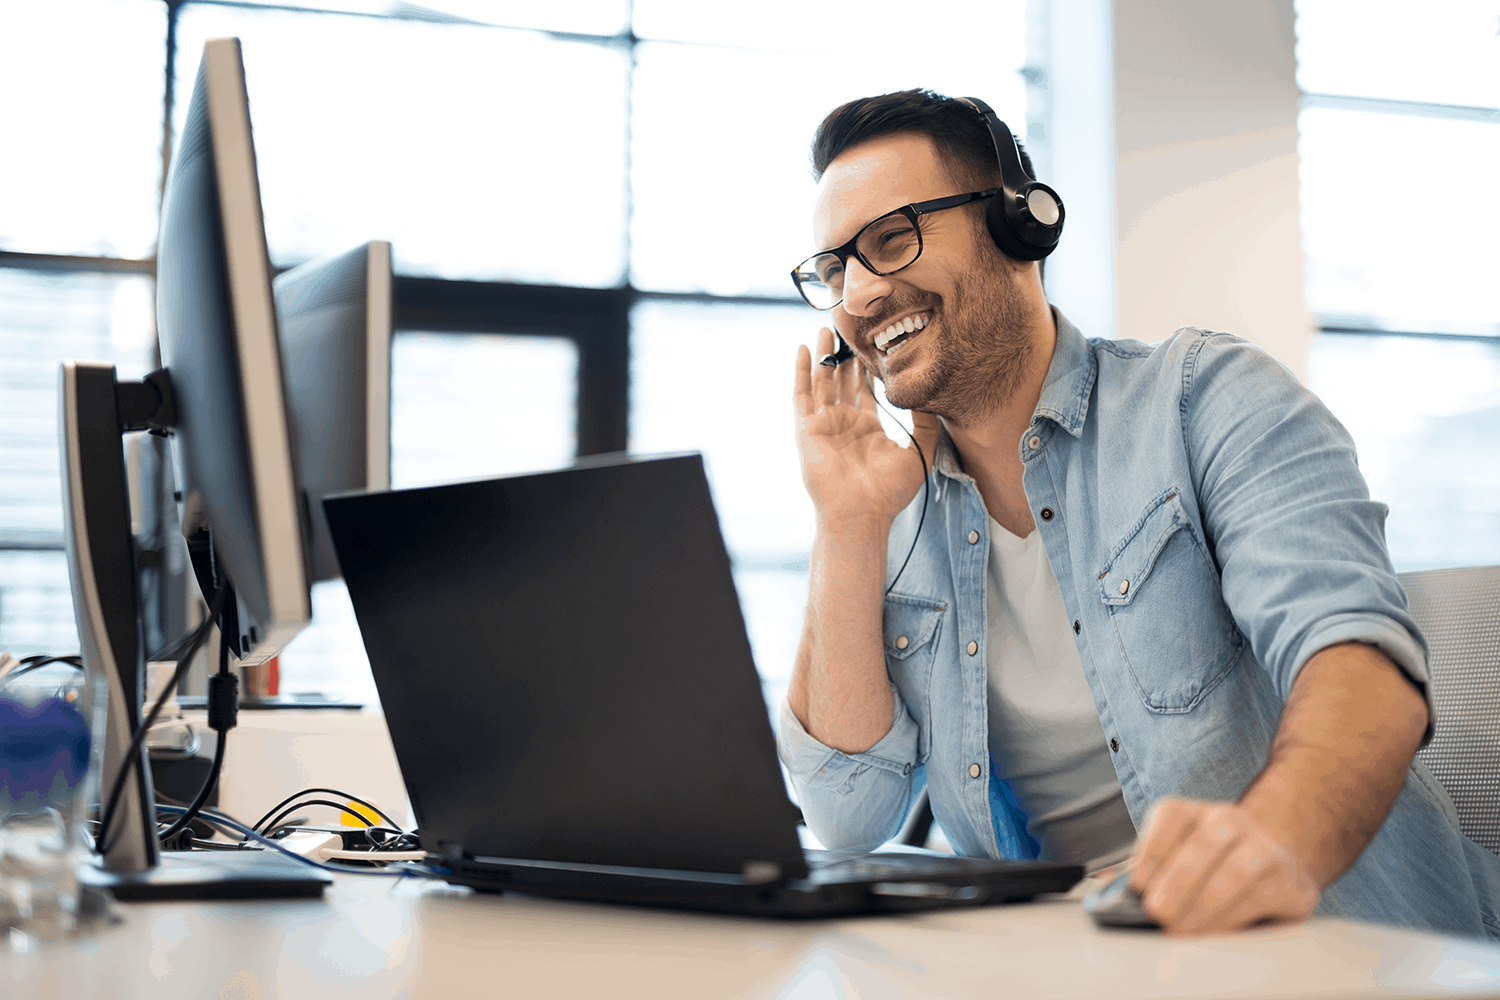 Smiling man working on computer and wearing a headset helping troubleshoot problems and making customers happy